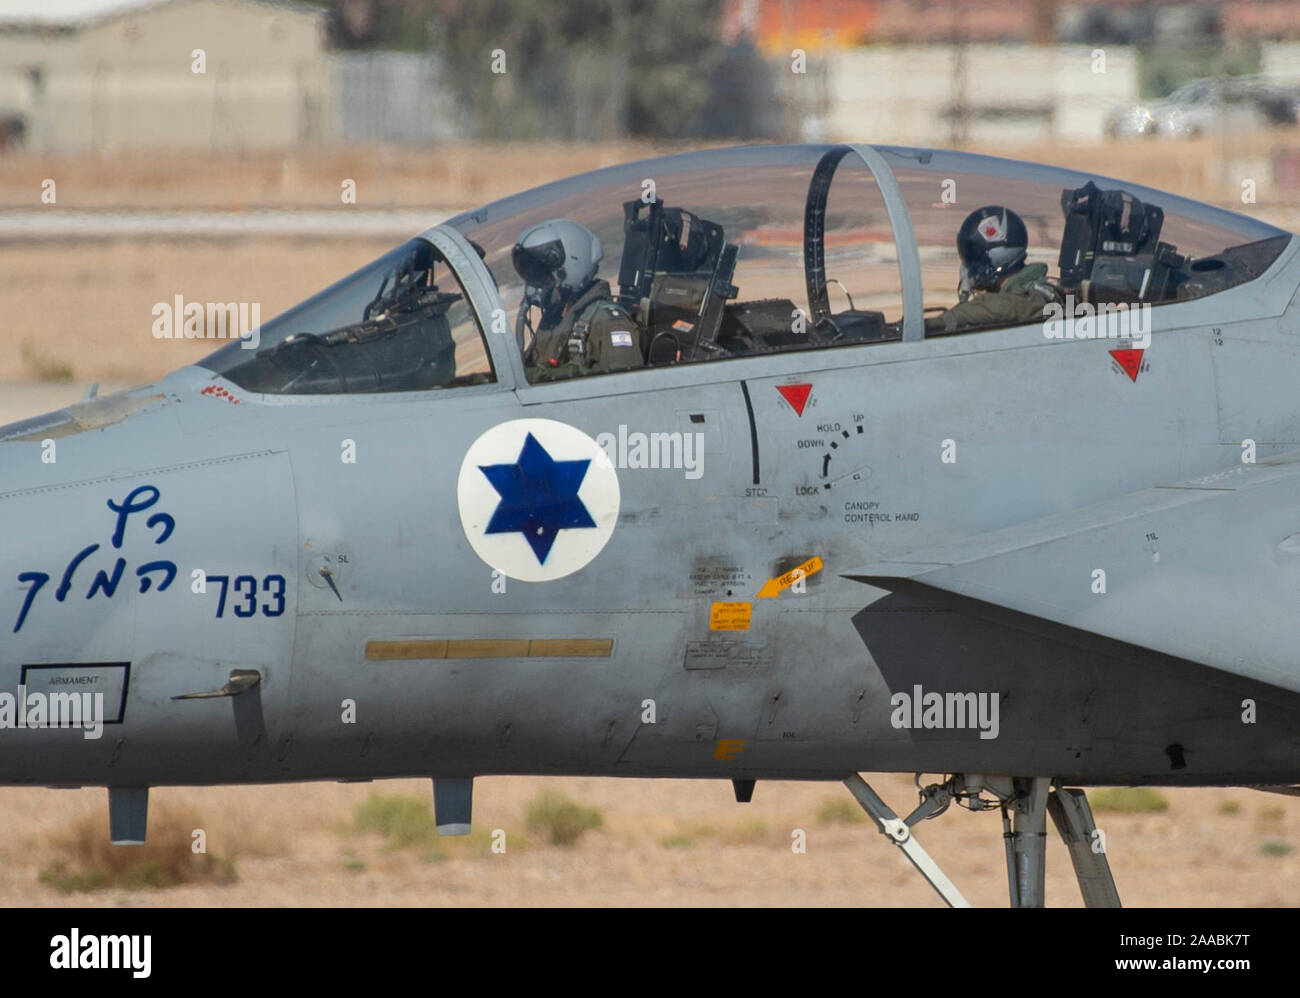 An Israeli air force F-15I Ra'am taxis down the runway during Blue Flag 2019 at Uvda Air Base, Israel, November 4, 2019. The U.S. and Israel have a strong and enduring military-to-military partnership built on trust and developed over decades of cooperation. (U.S. Air Force photo by Airman 1st Class Kyle Cope) Stock Photo